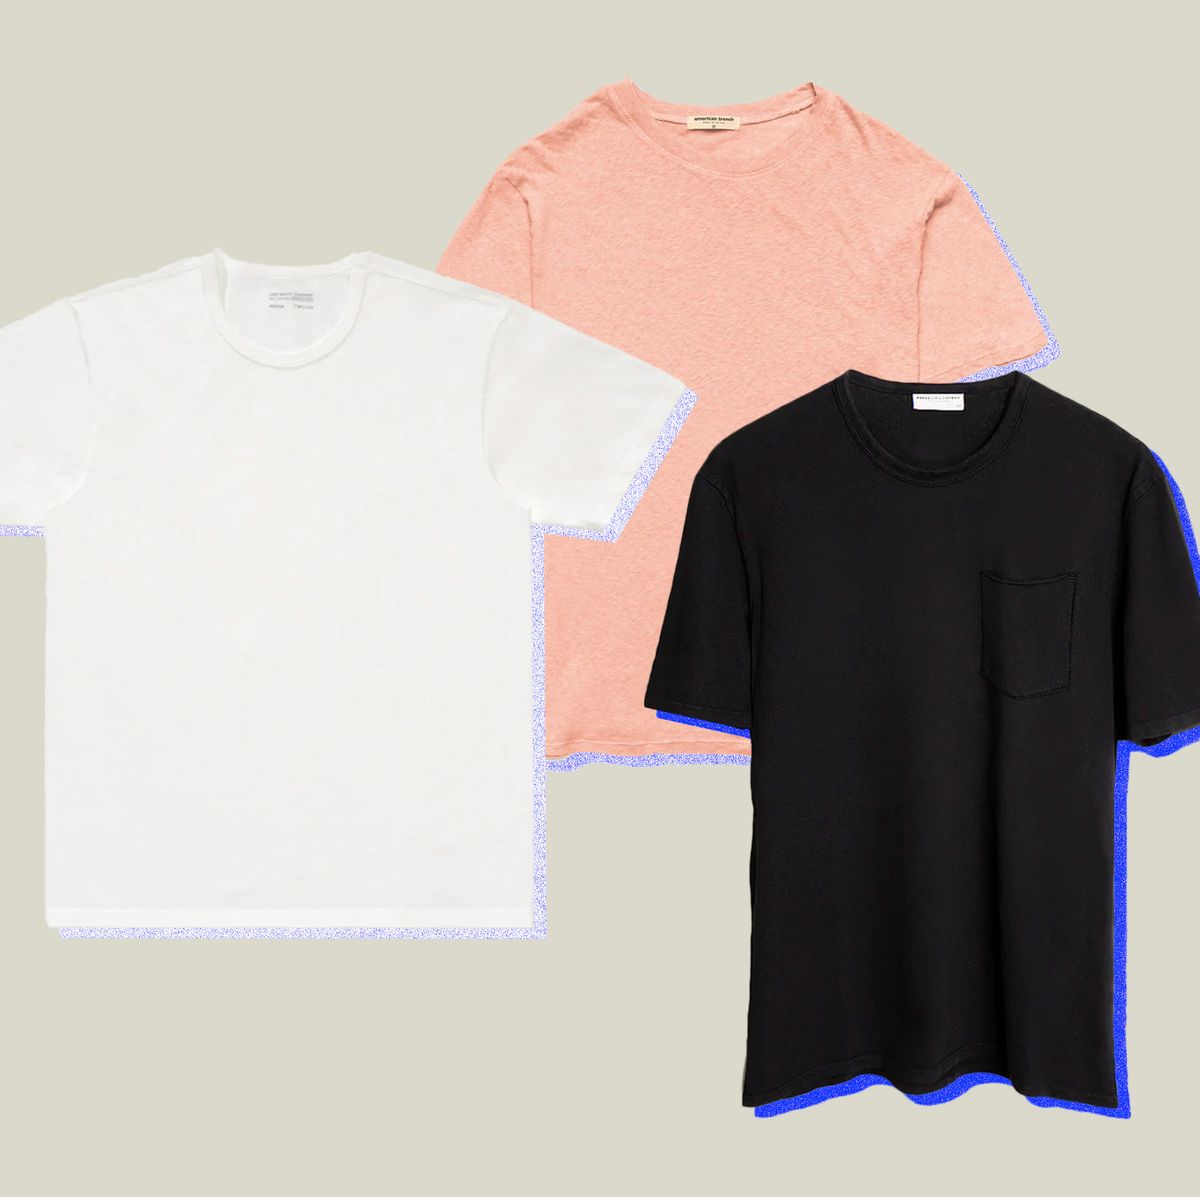 The Best Basic T-Shirts for Every Man's Closet